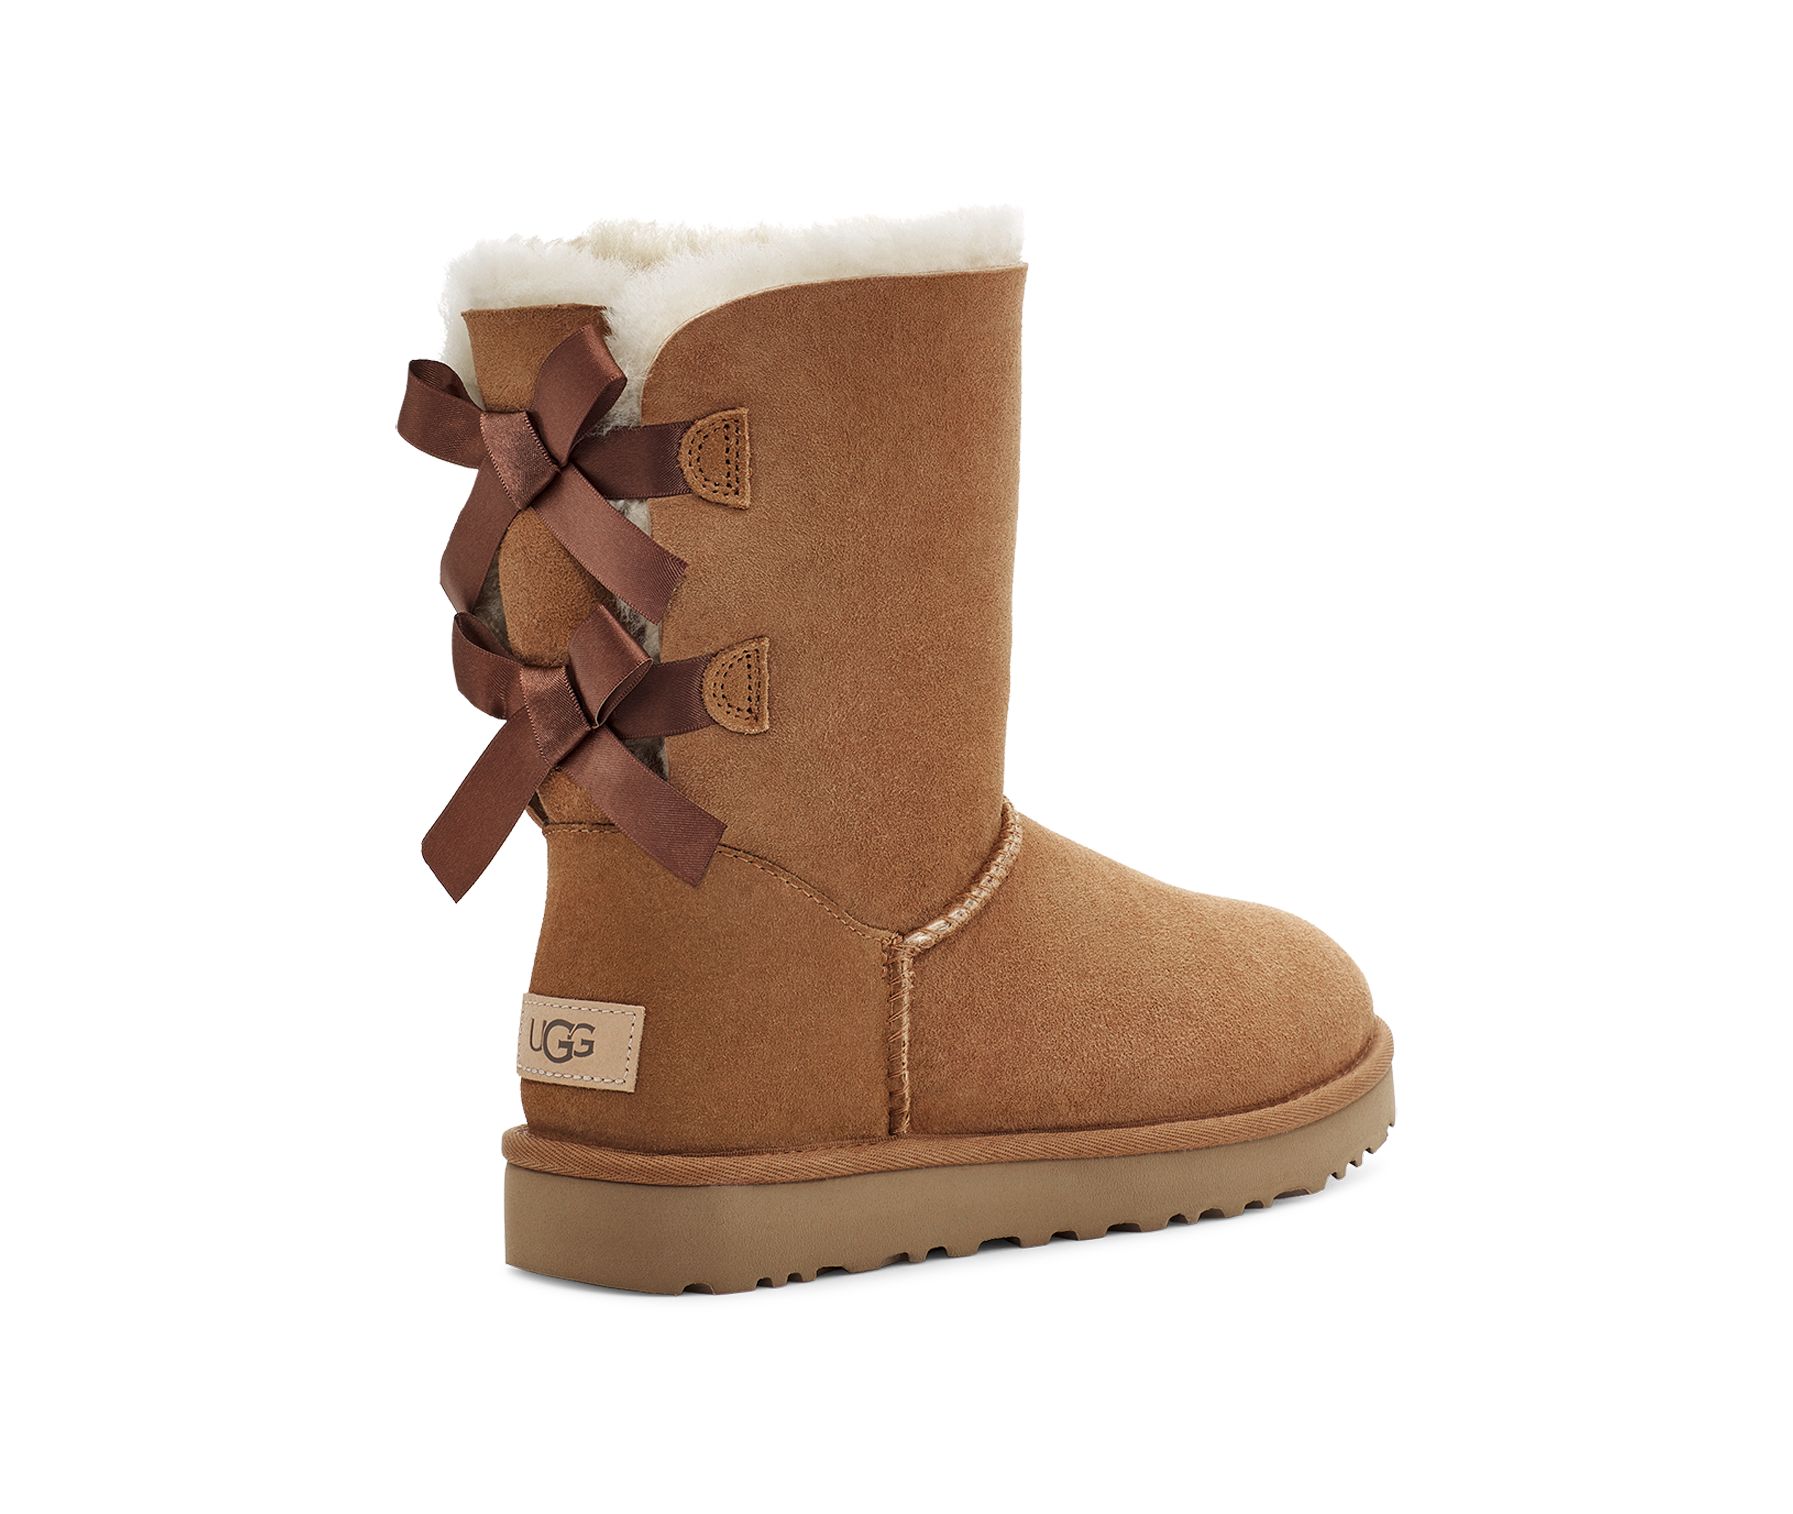 UGG Women's Bailey Bow II Water-Resistant Boots in Brown, Size 8 | UGG (US)